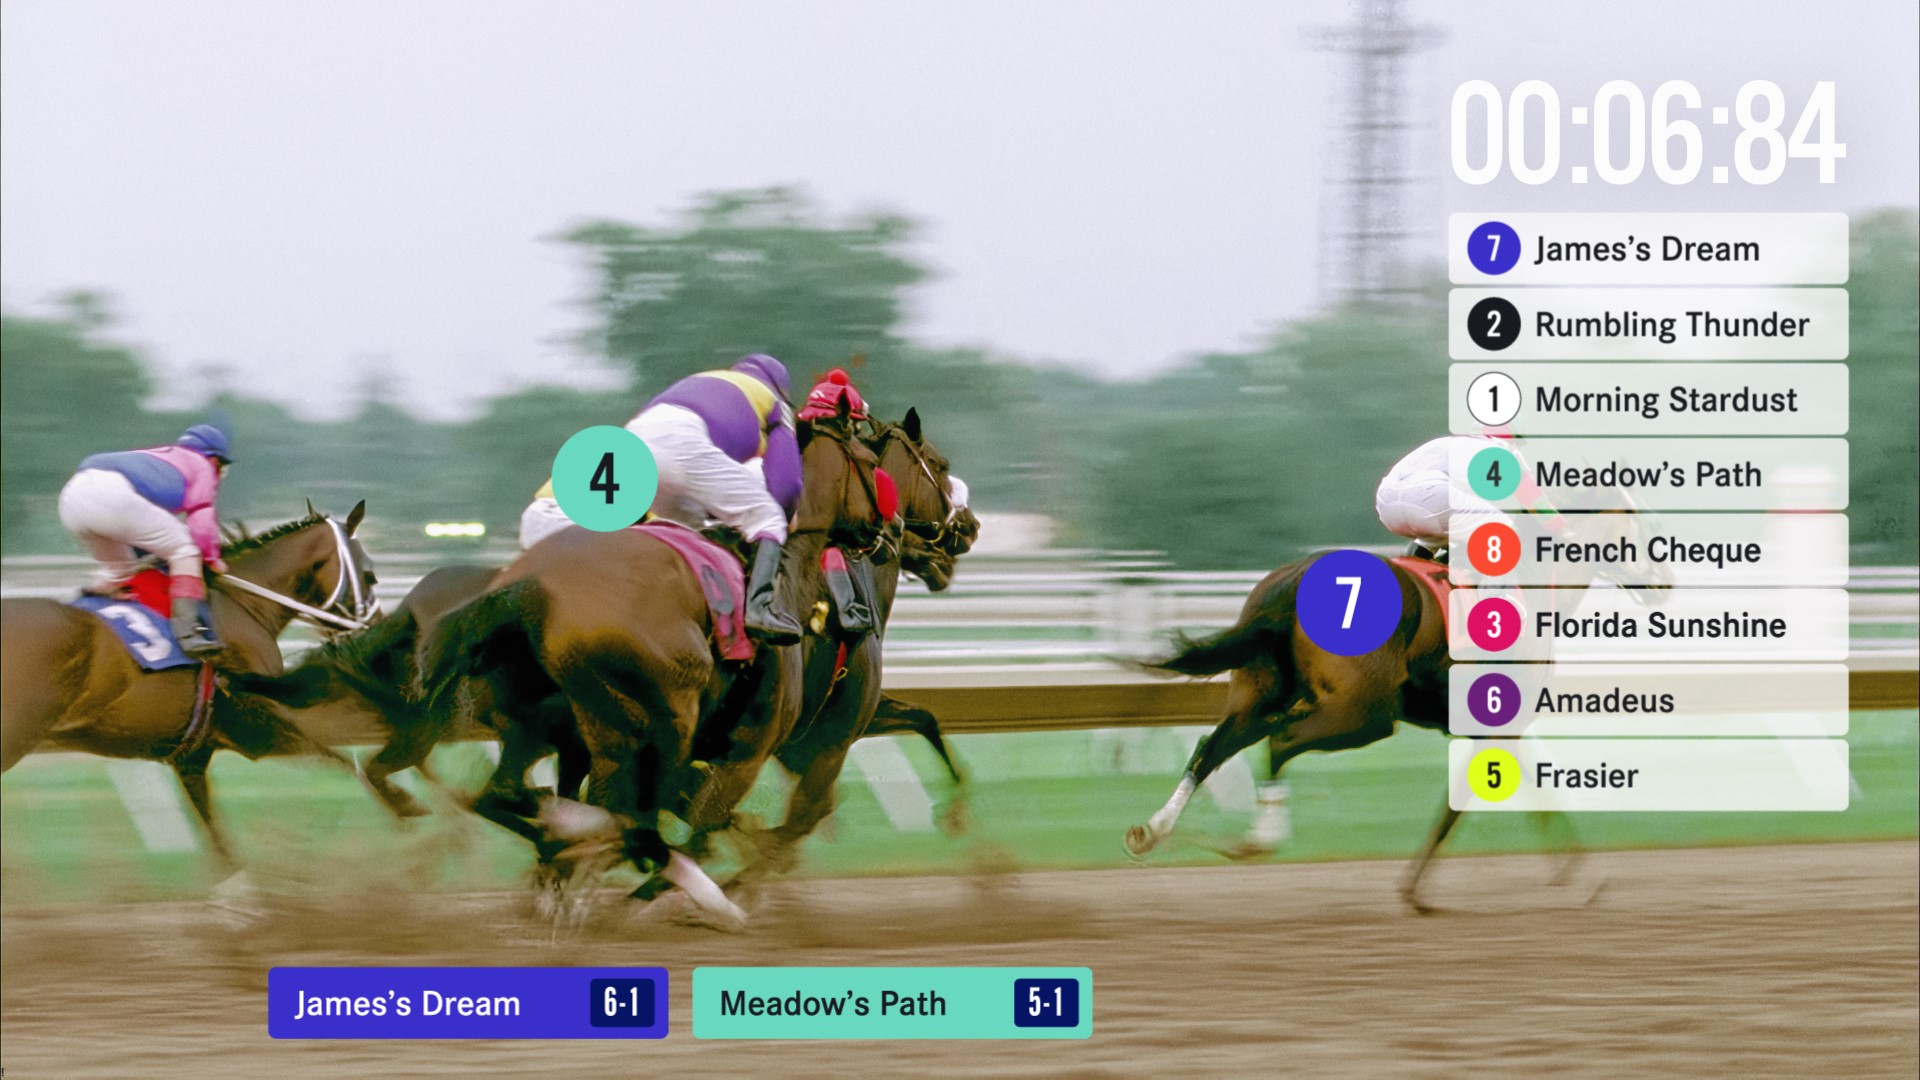 Immersal Horse Racing track AR solution - race with augmented reality content